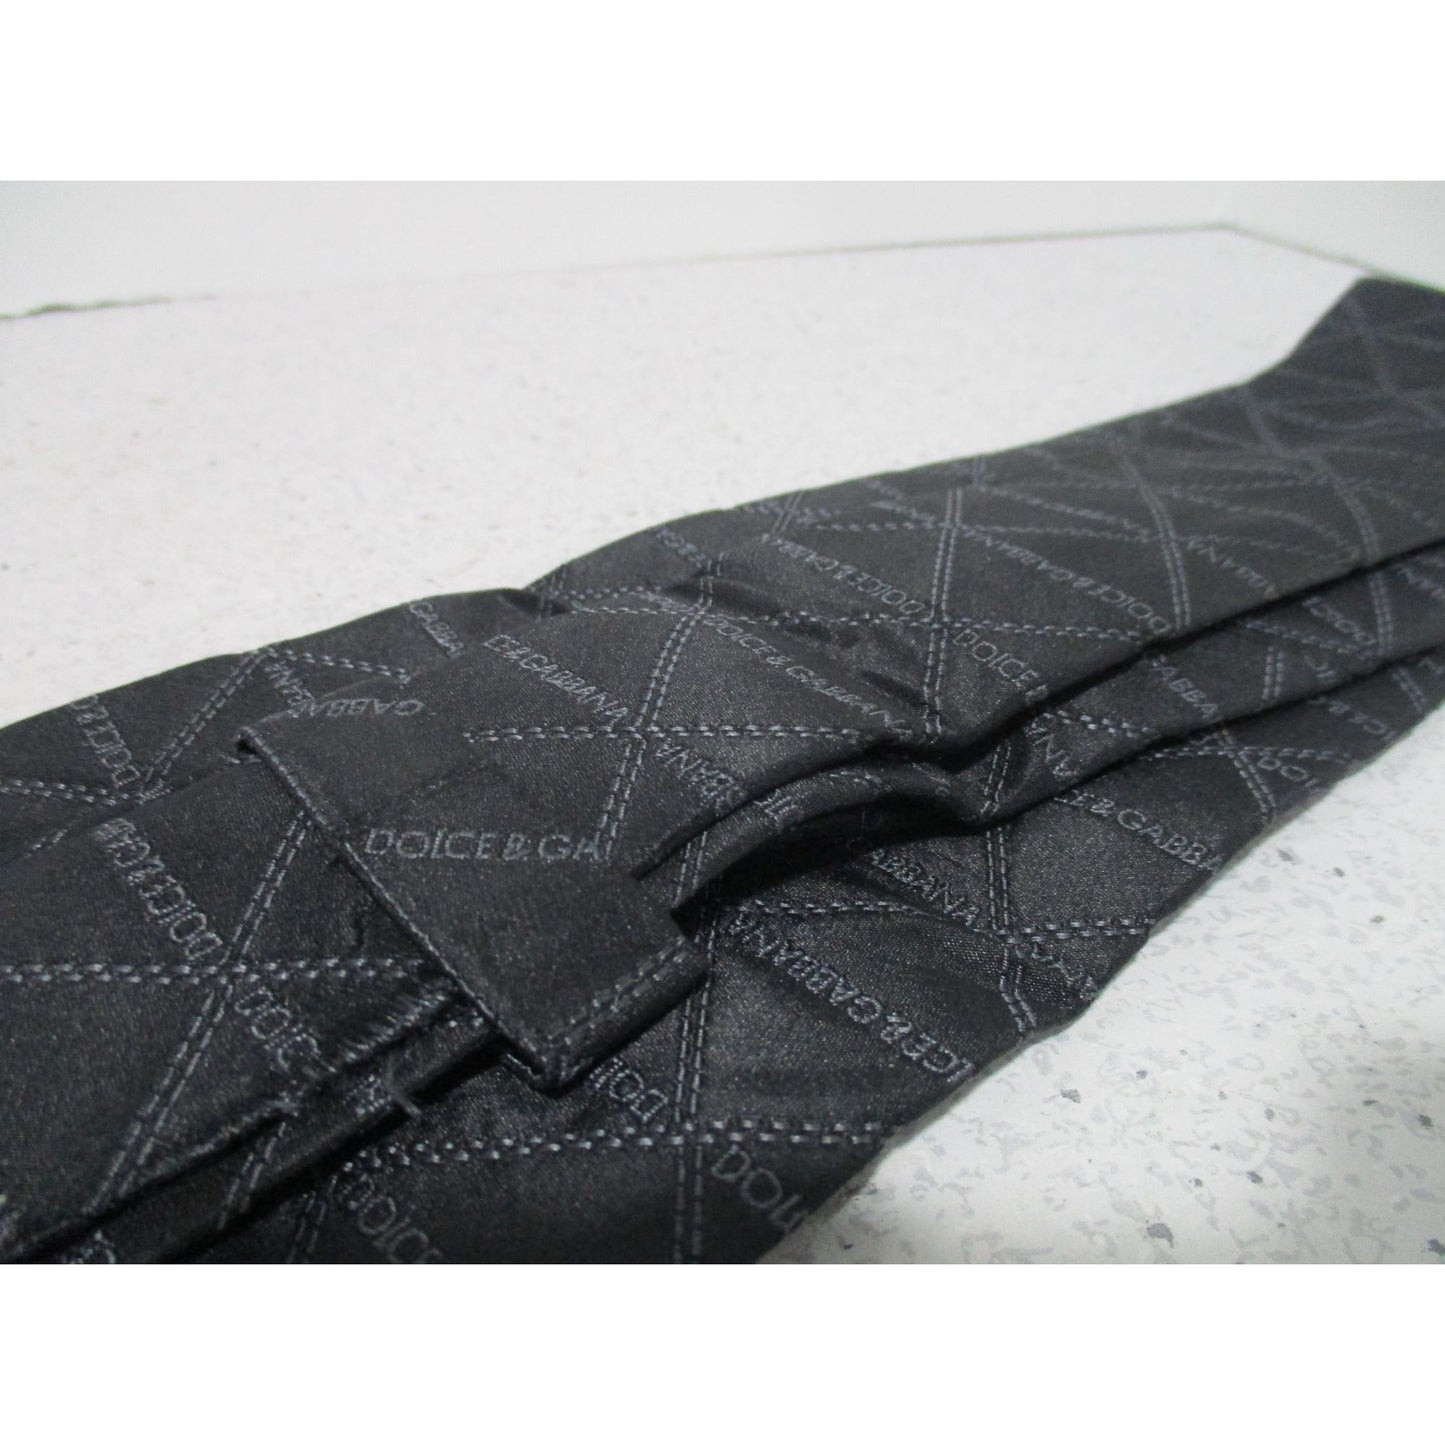 Vintage Dolce&Gabbana logo tie/scarf made of 100%, black silk with a logo print in shades of grey